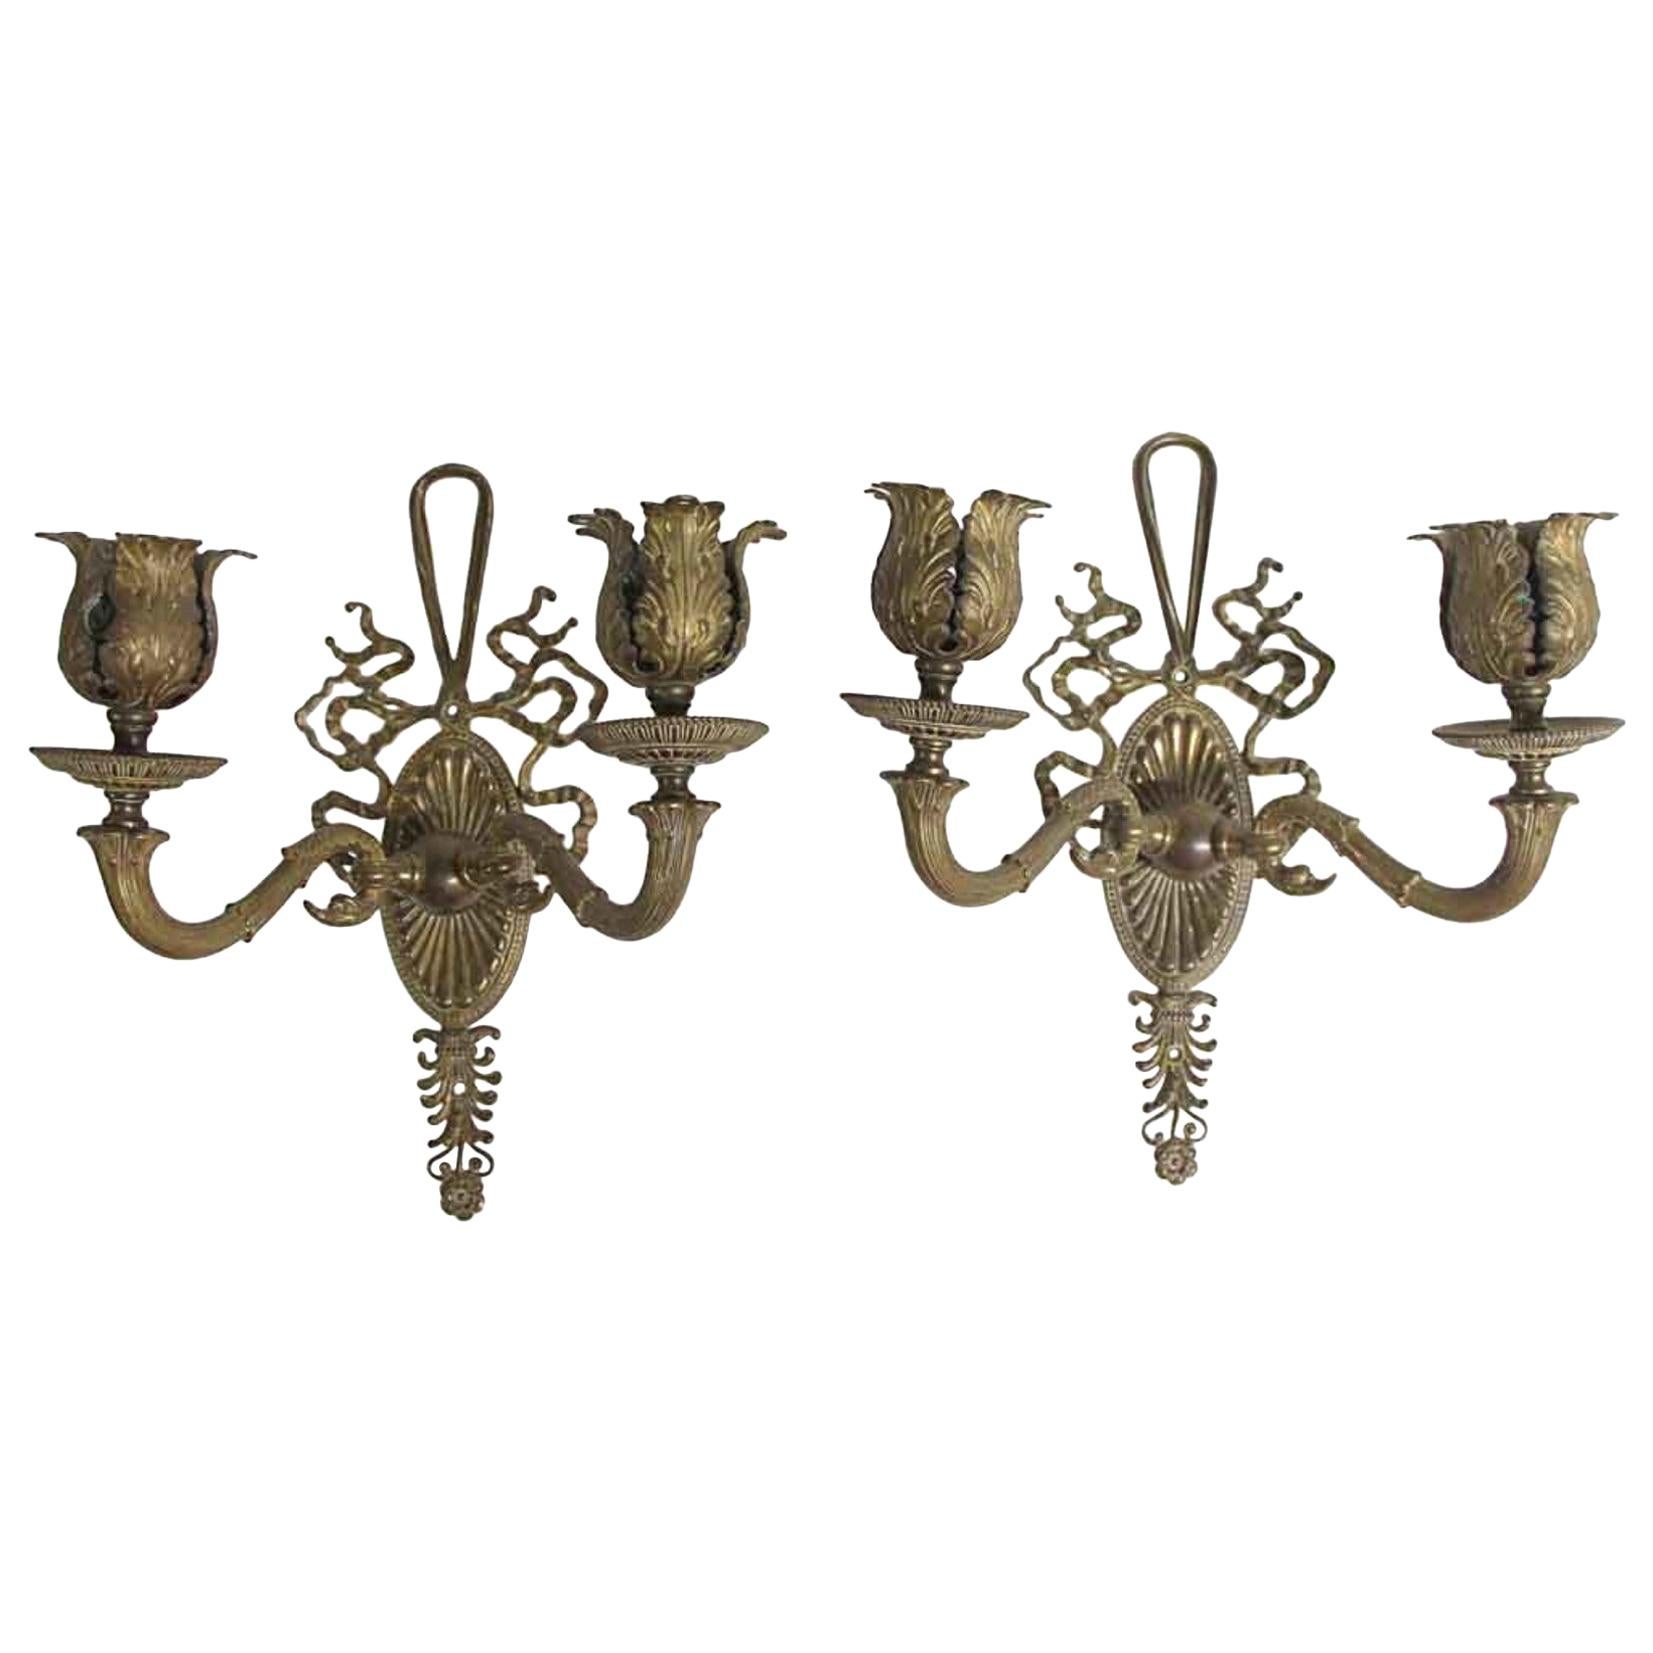 1910s Pair of Petite Bronze Federal Two-Arm Wall Sconces, Floral Details